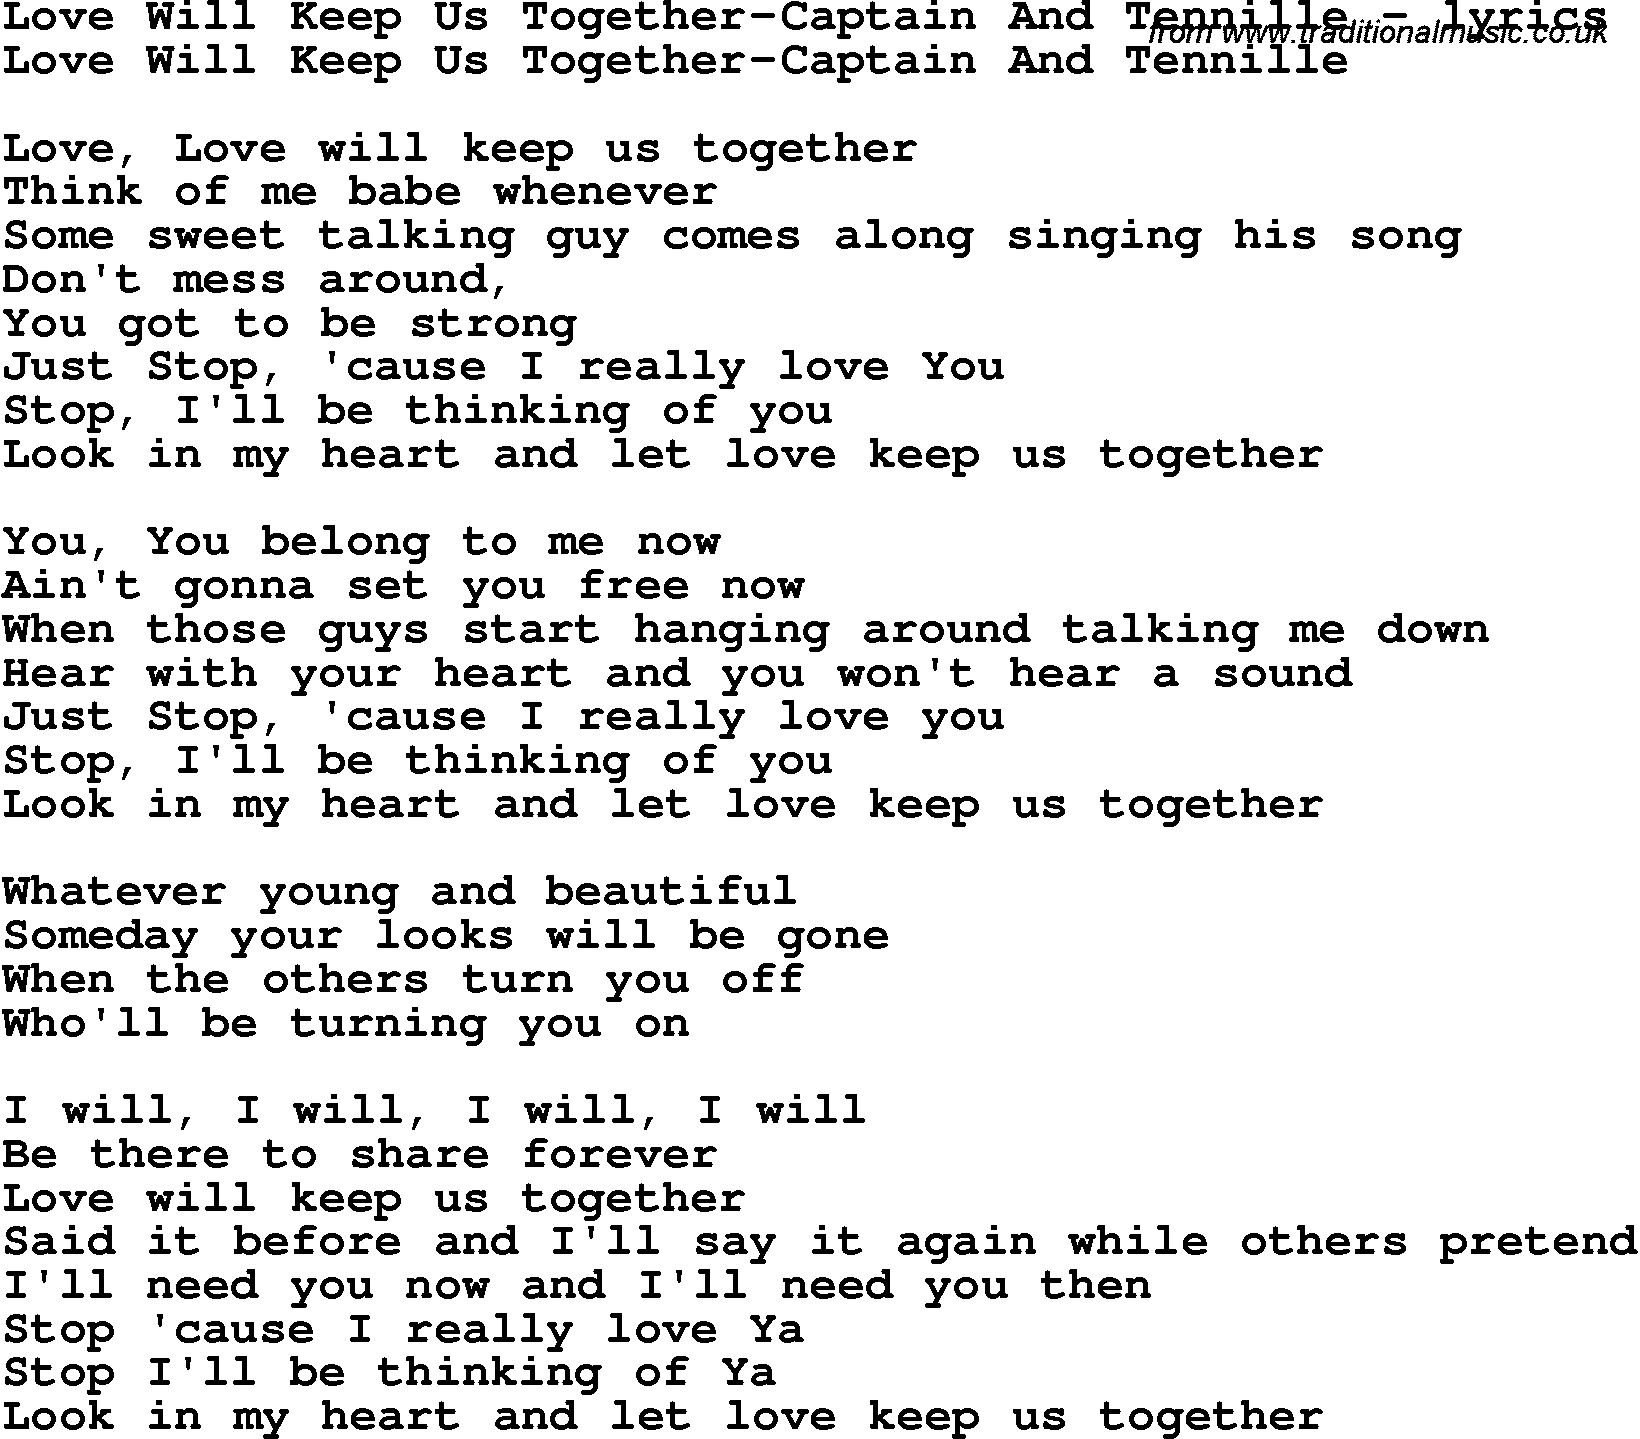 Love Song Lyrics for: Love Will Keep Us Together-Captain And Tennille